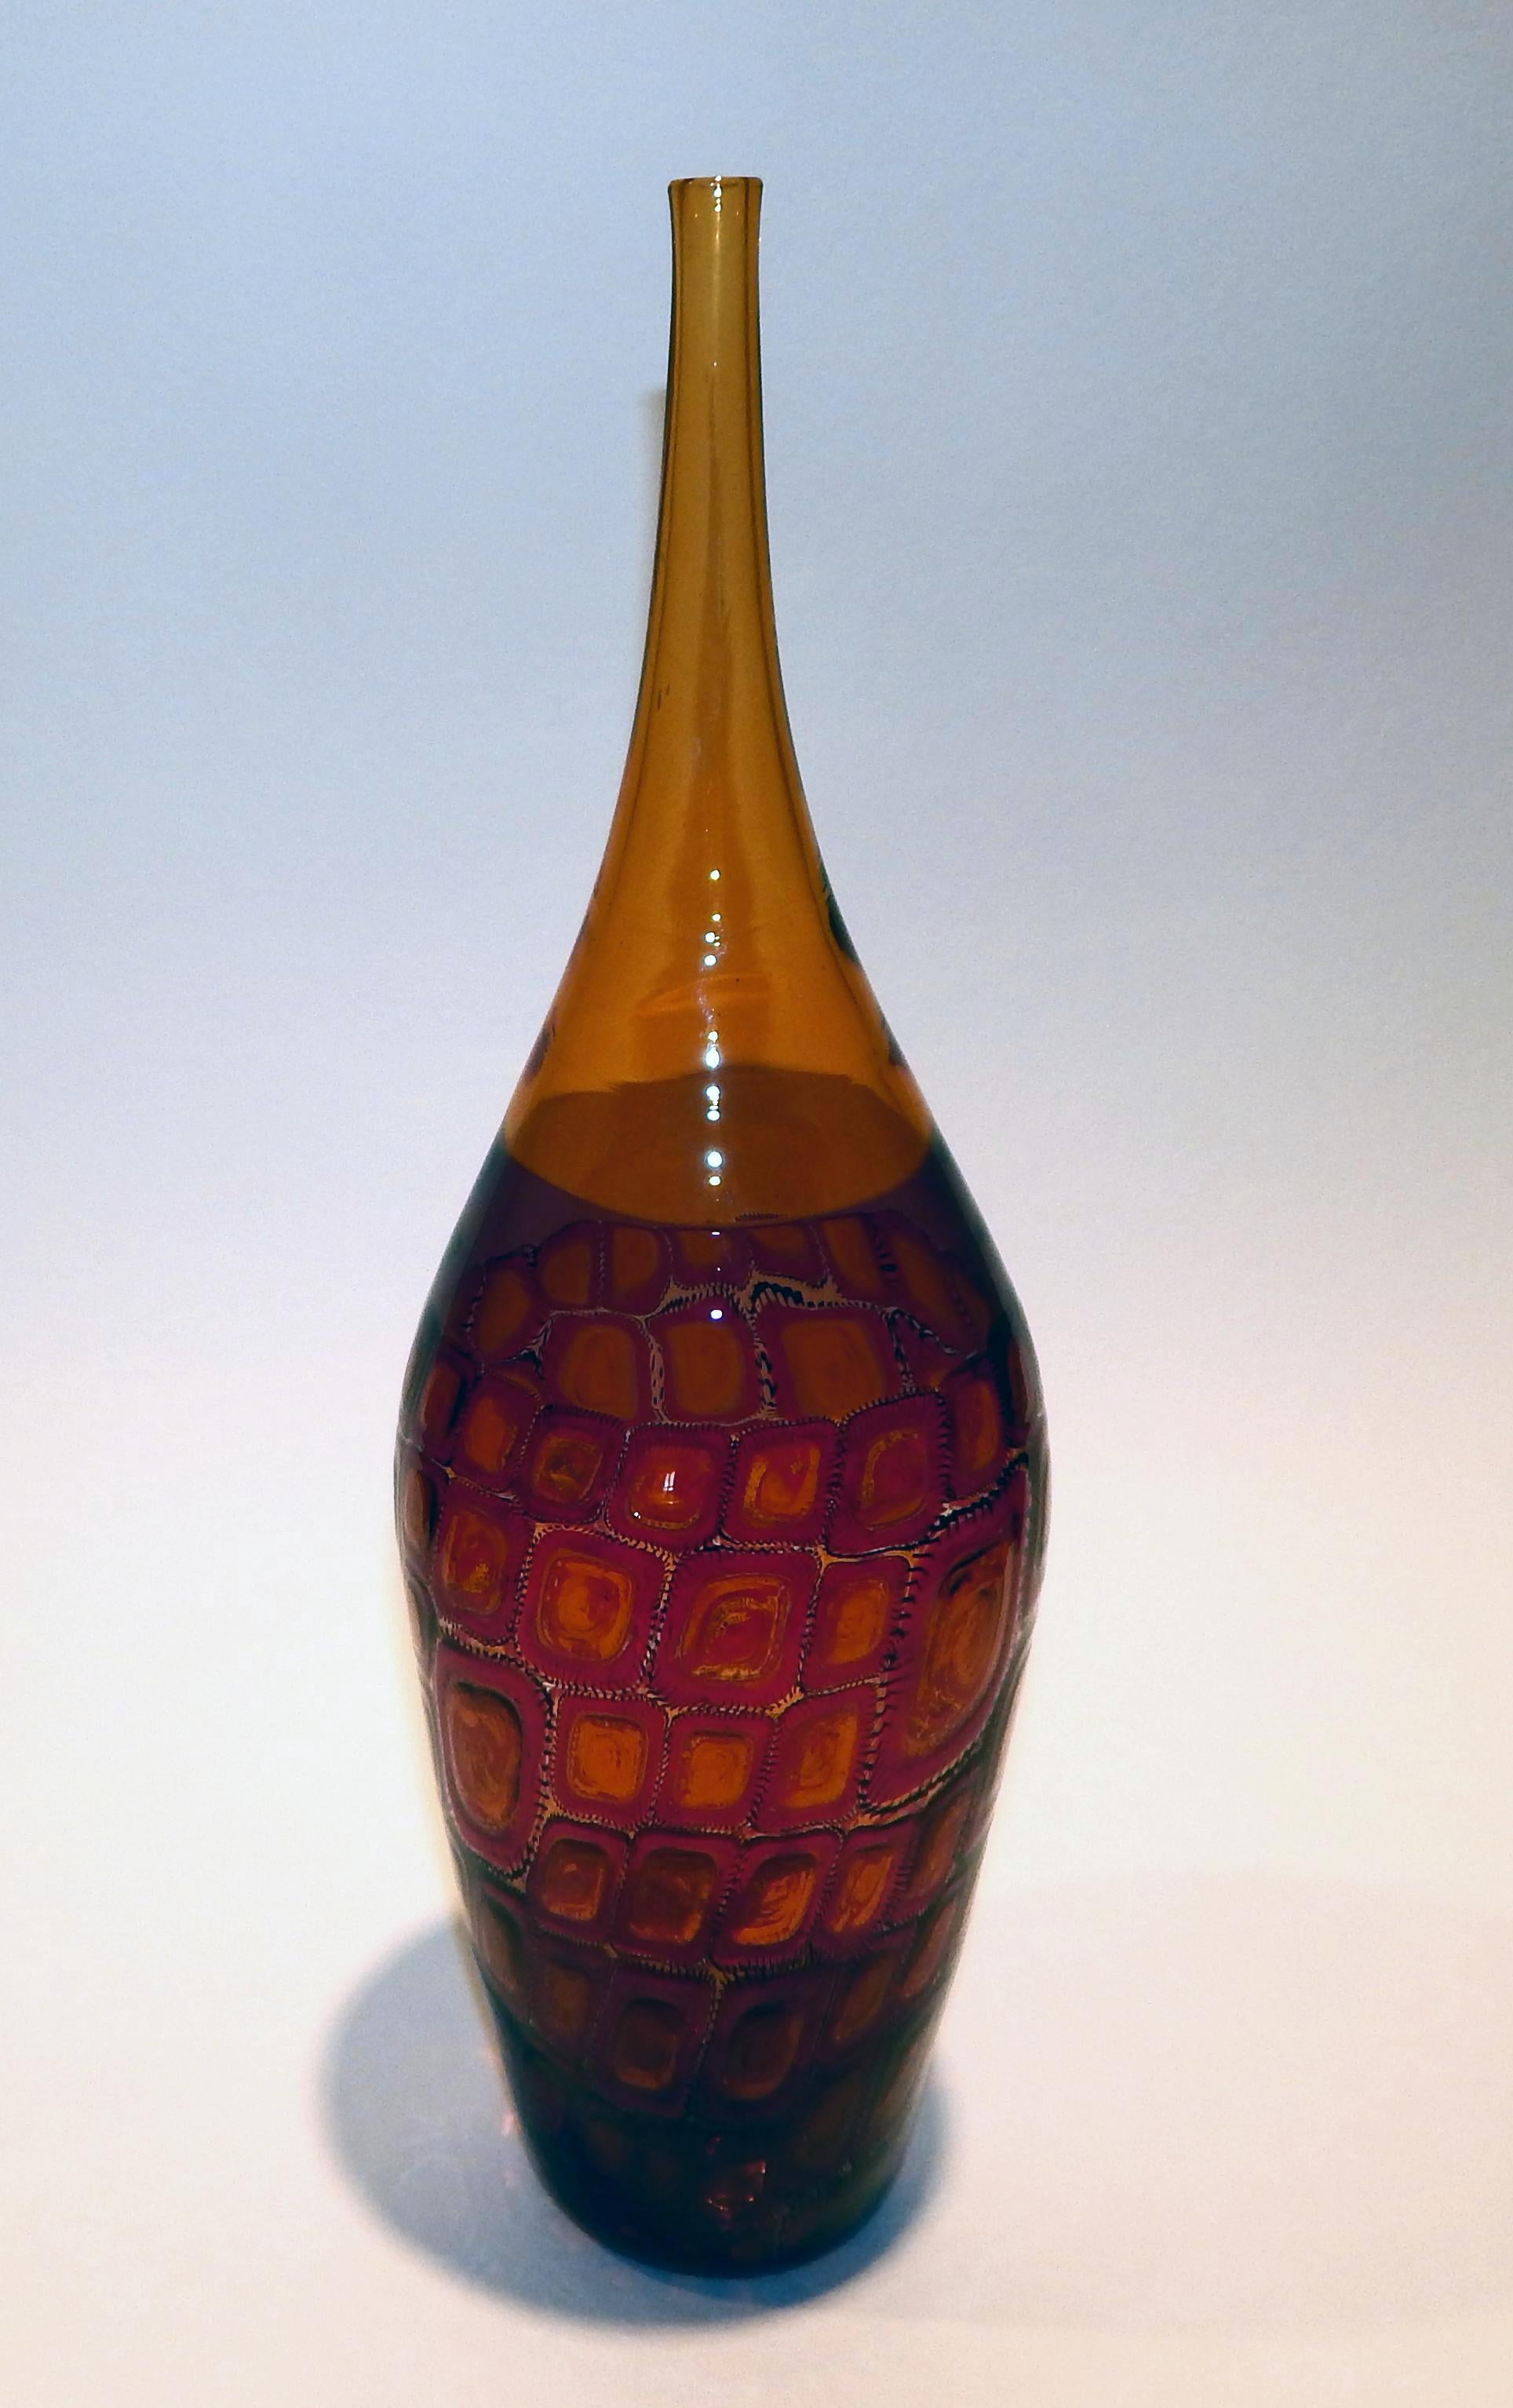 Adriano dalla Valentina Murano glass amber bottle with Mosaica Motif on the lower half.
Signed “Valentina” and dated 2003 on the base. In excellent condition. Measures: 14